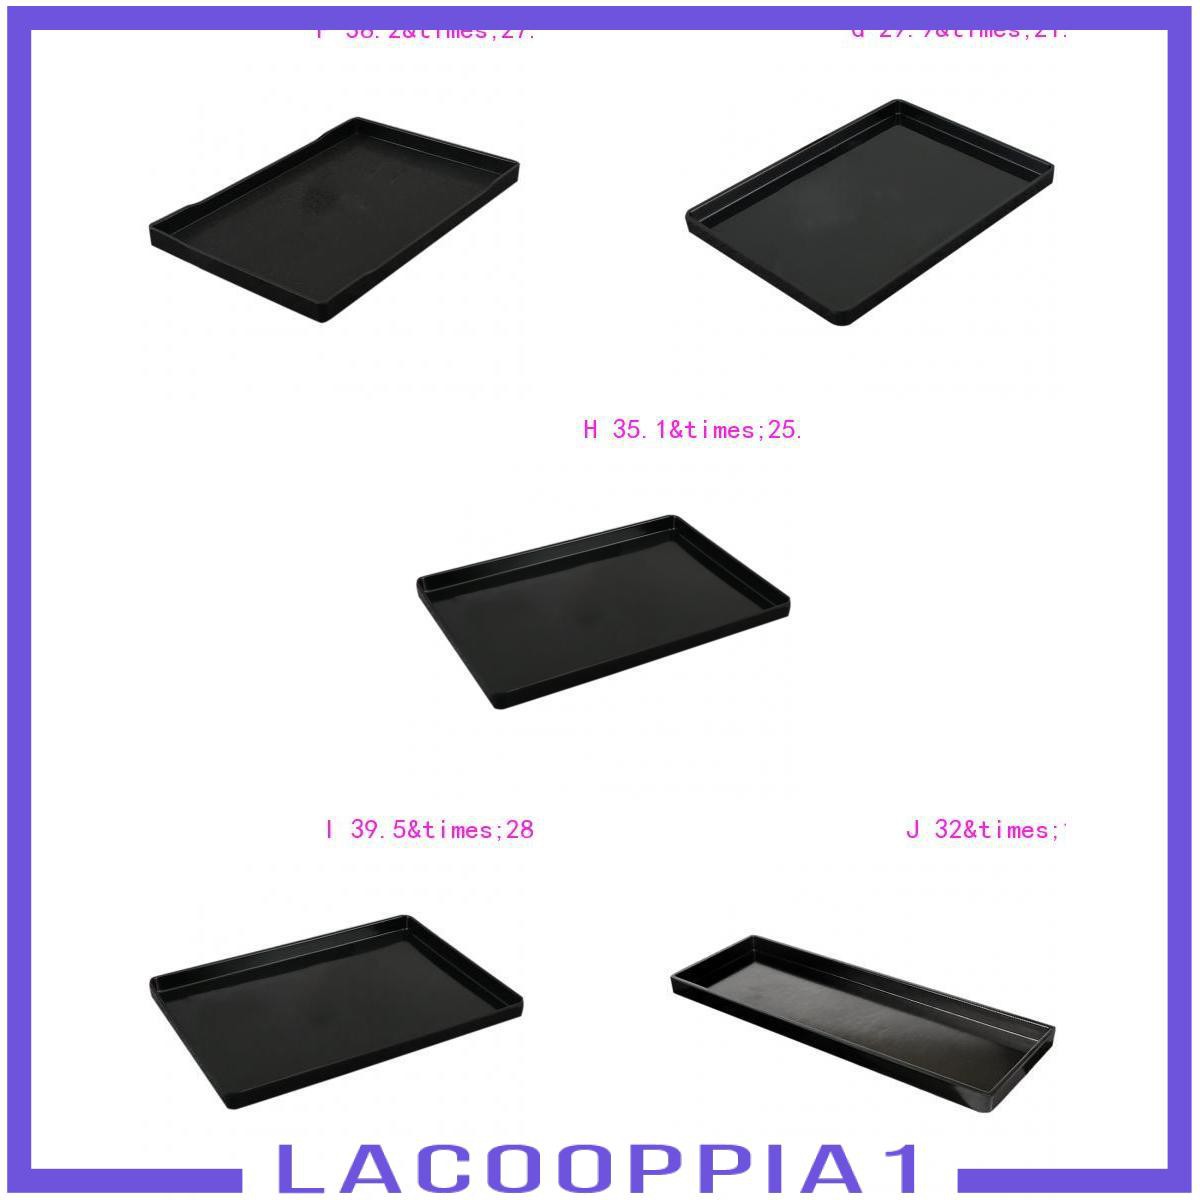 [LACOOPPIA1] Serving Fruit Bread Plate Wooden Breakfast Dishes Tea Bed Tray Black Platter